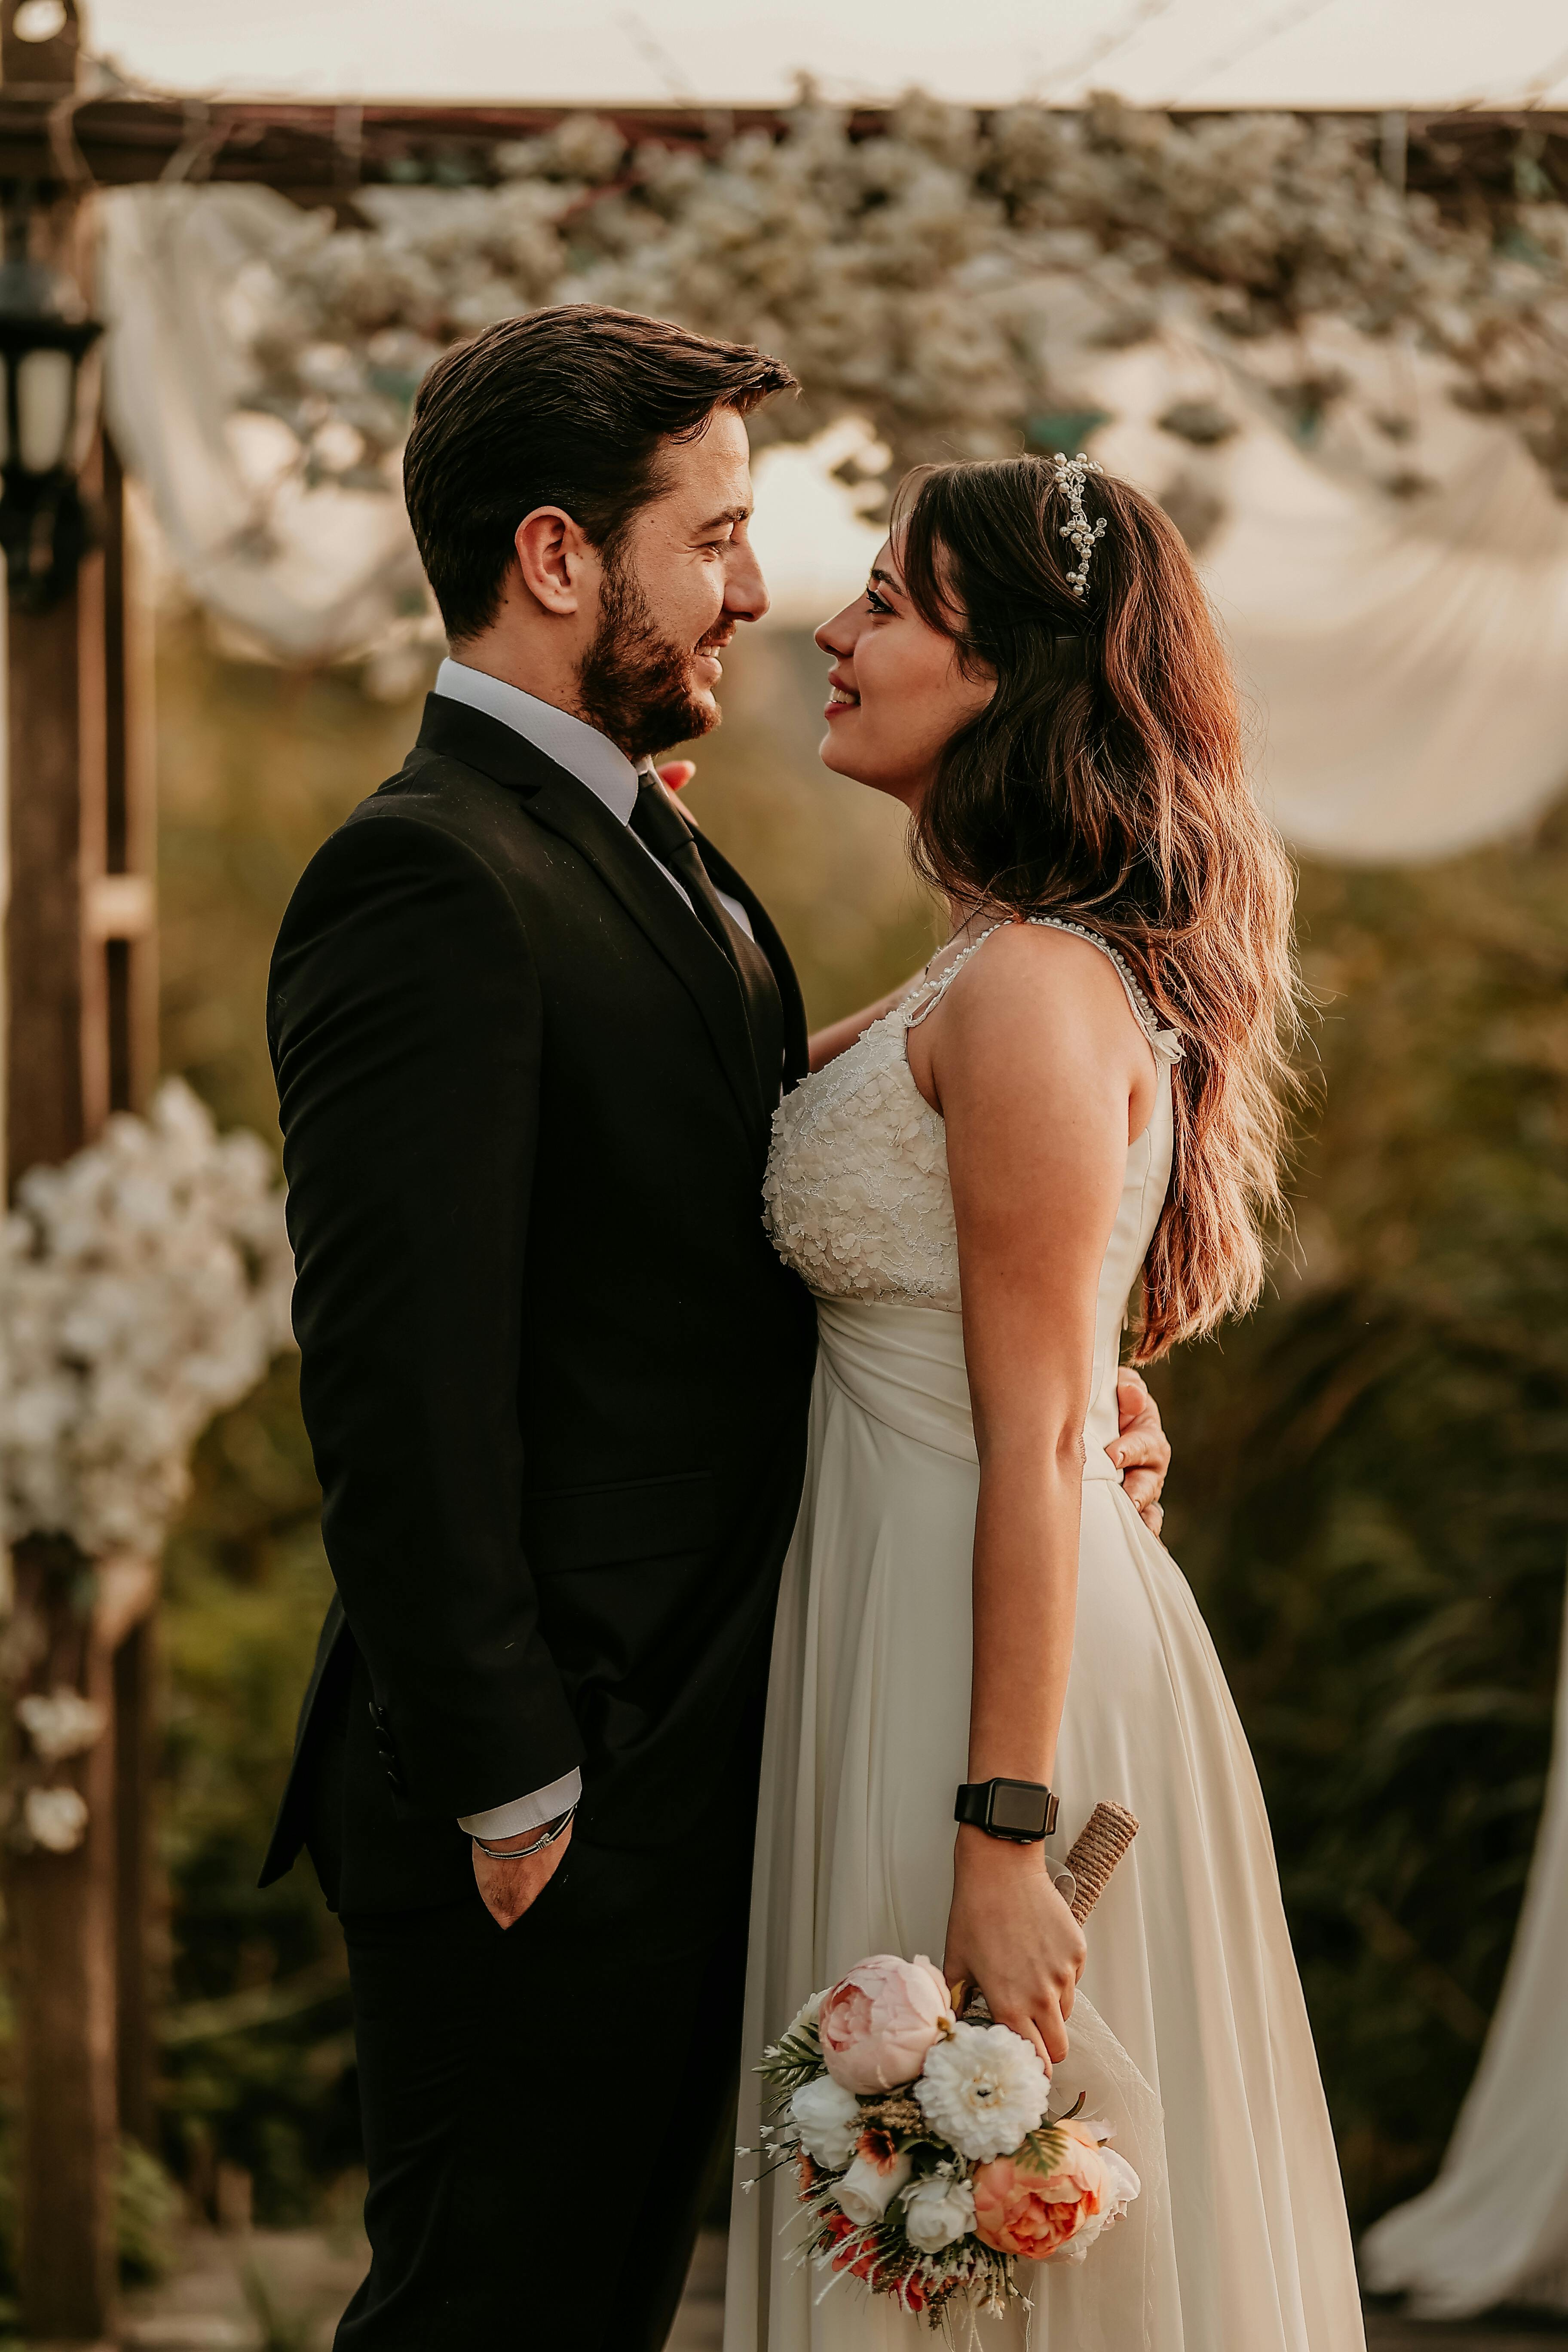 A newly wed couple | Source: Pexels